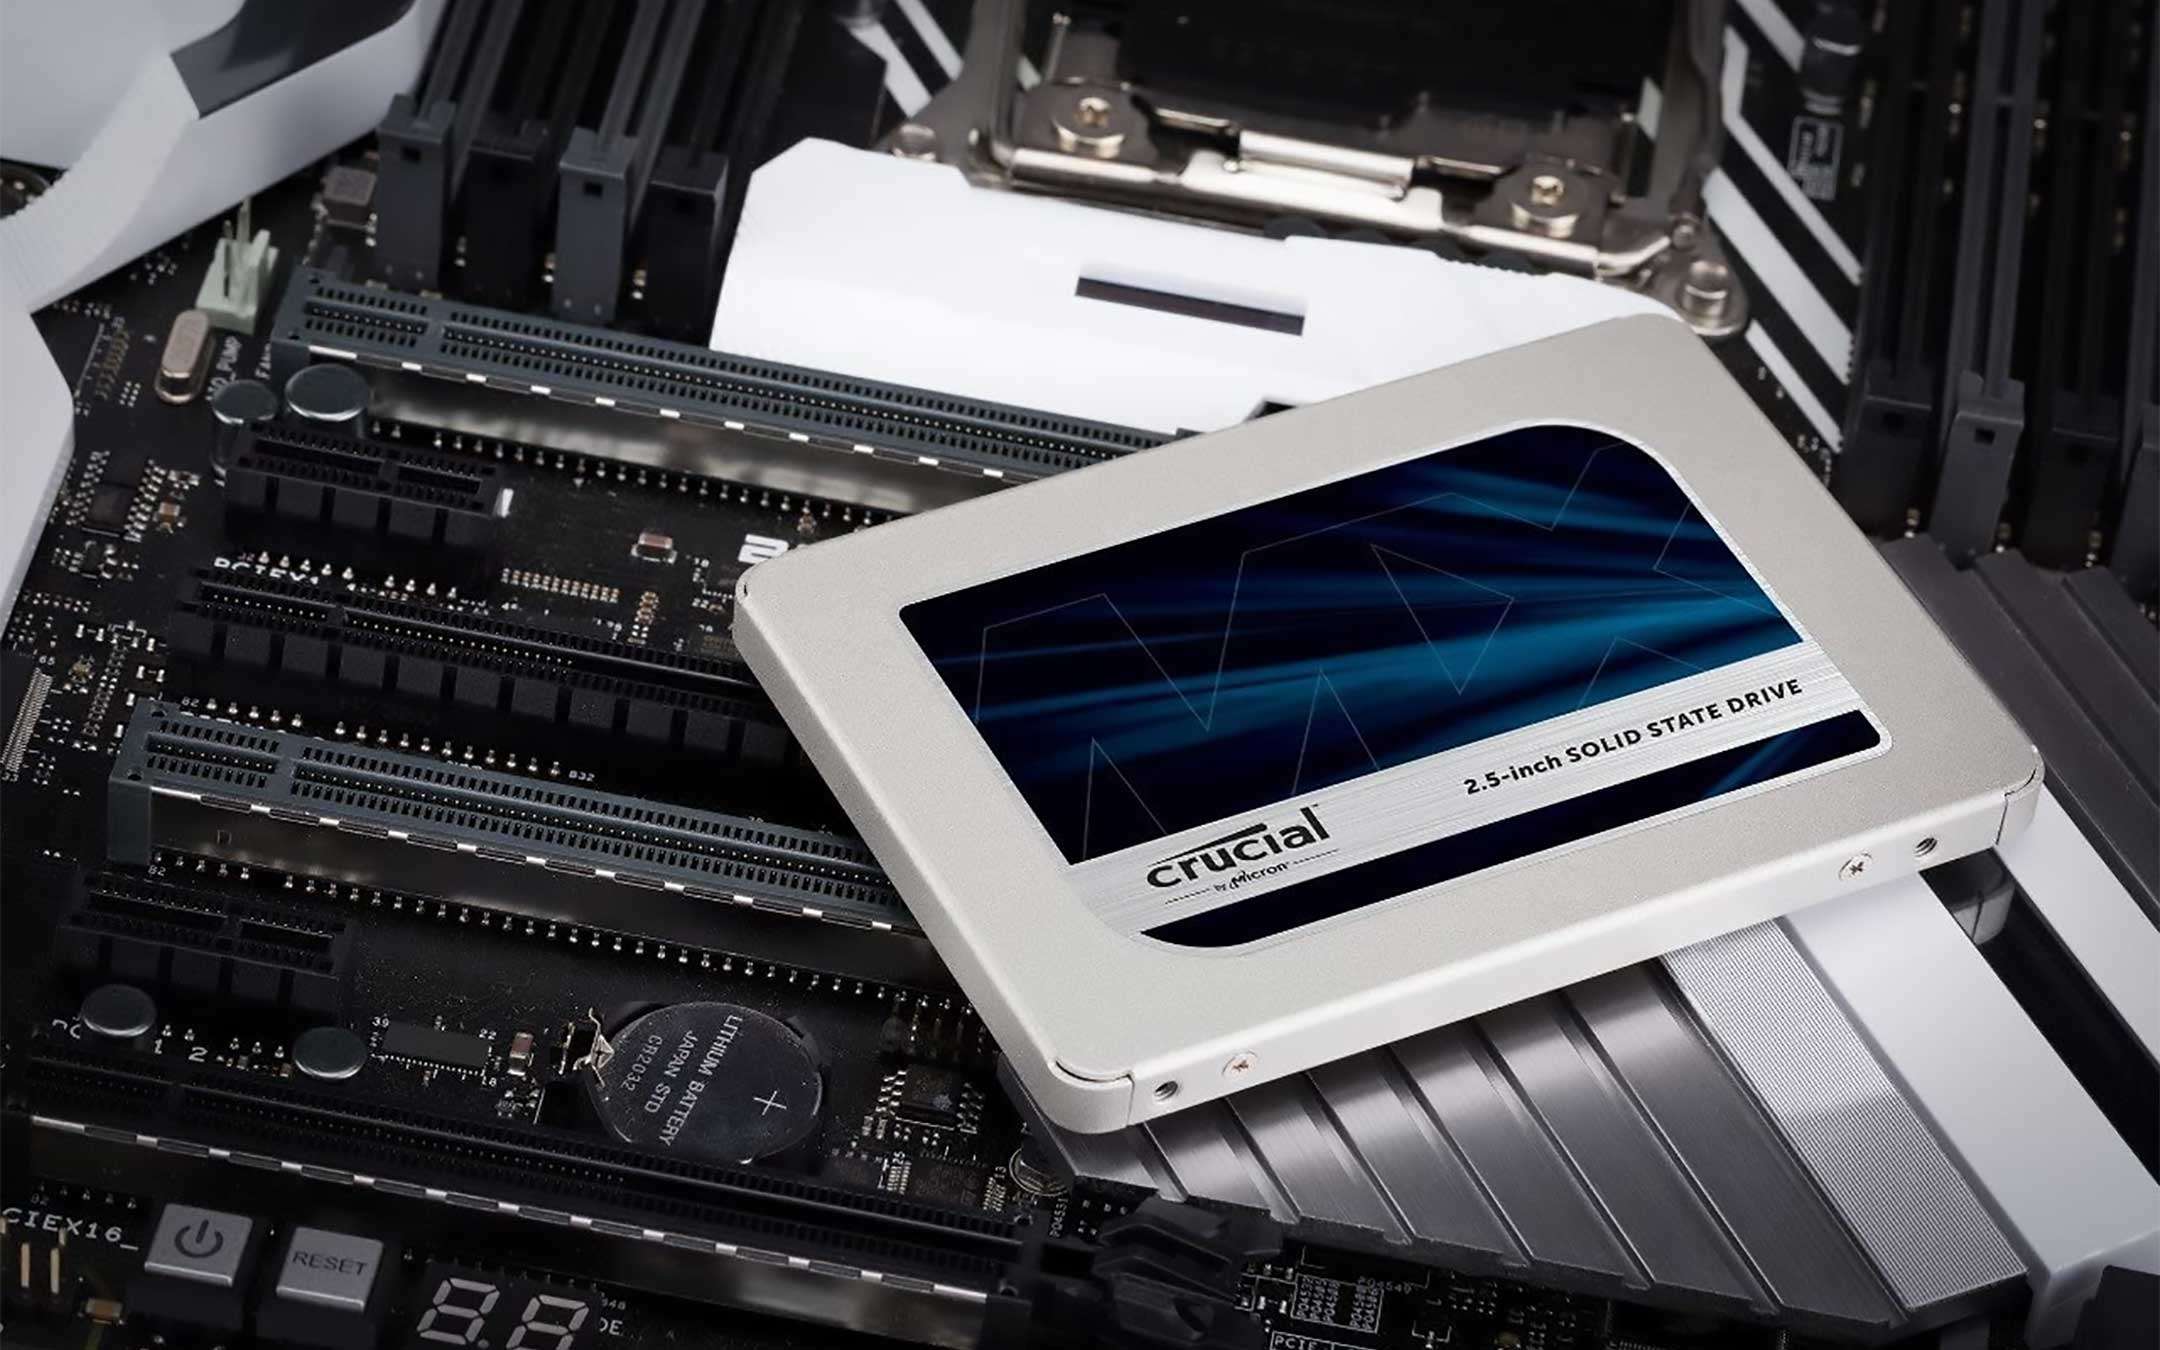 SSD on offer: Crucial MX500 from 500 GB at -24%